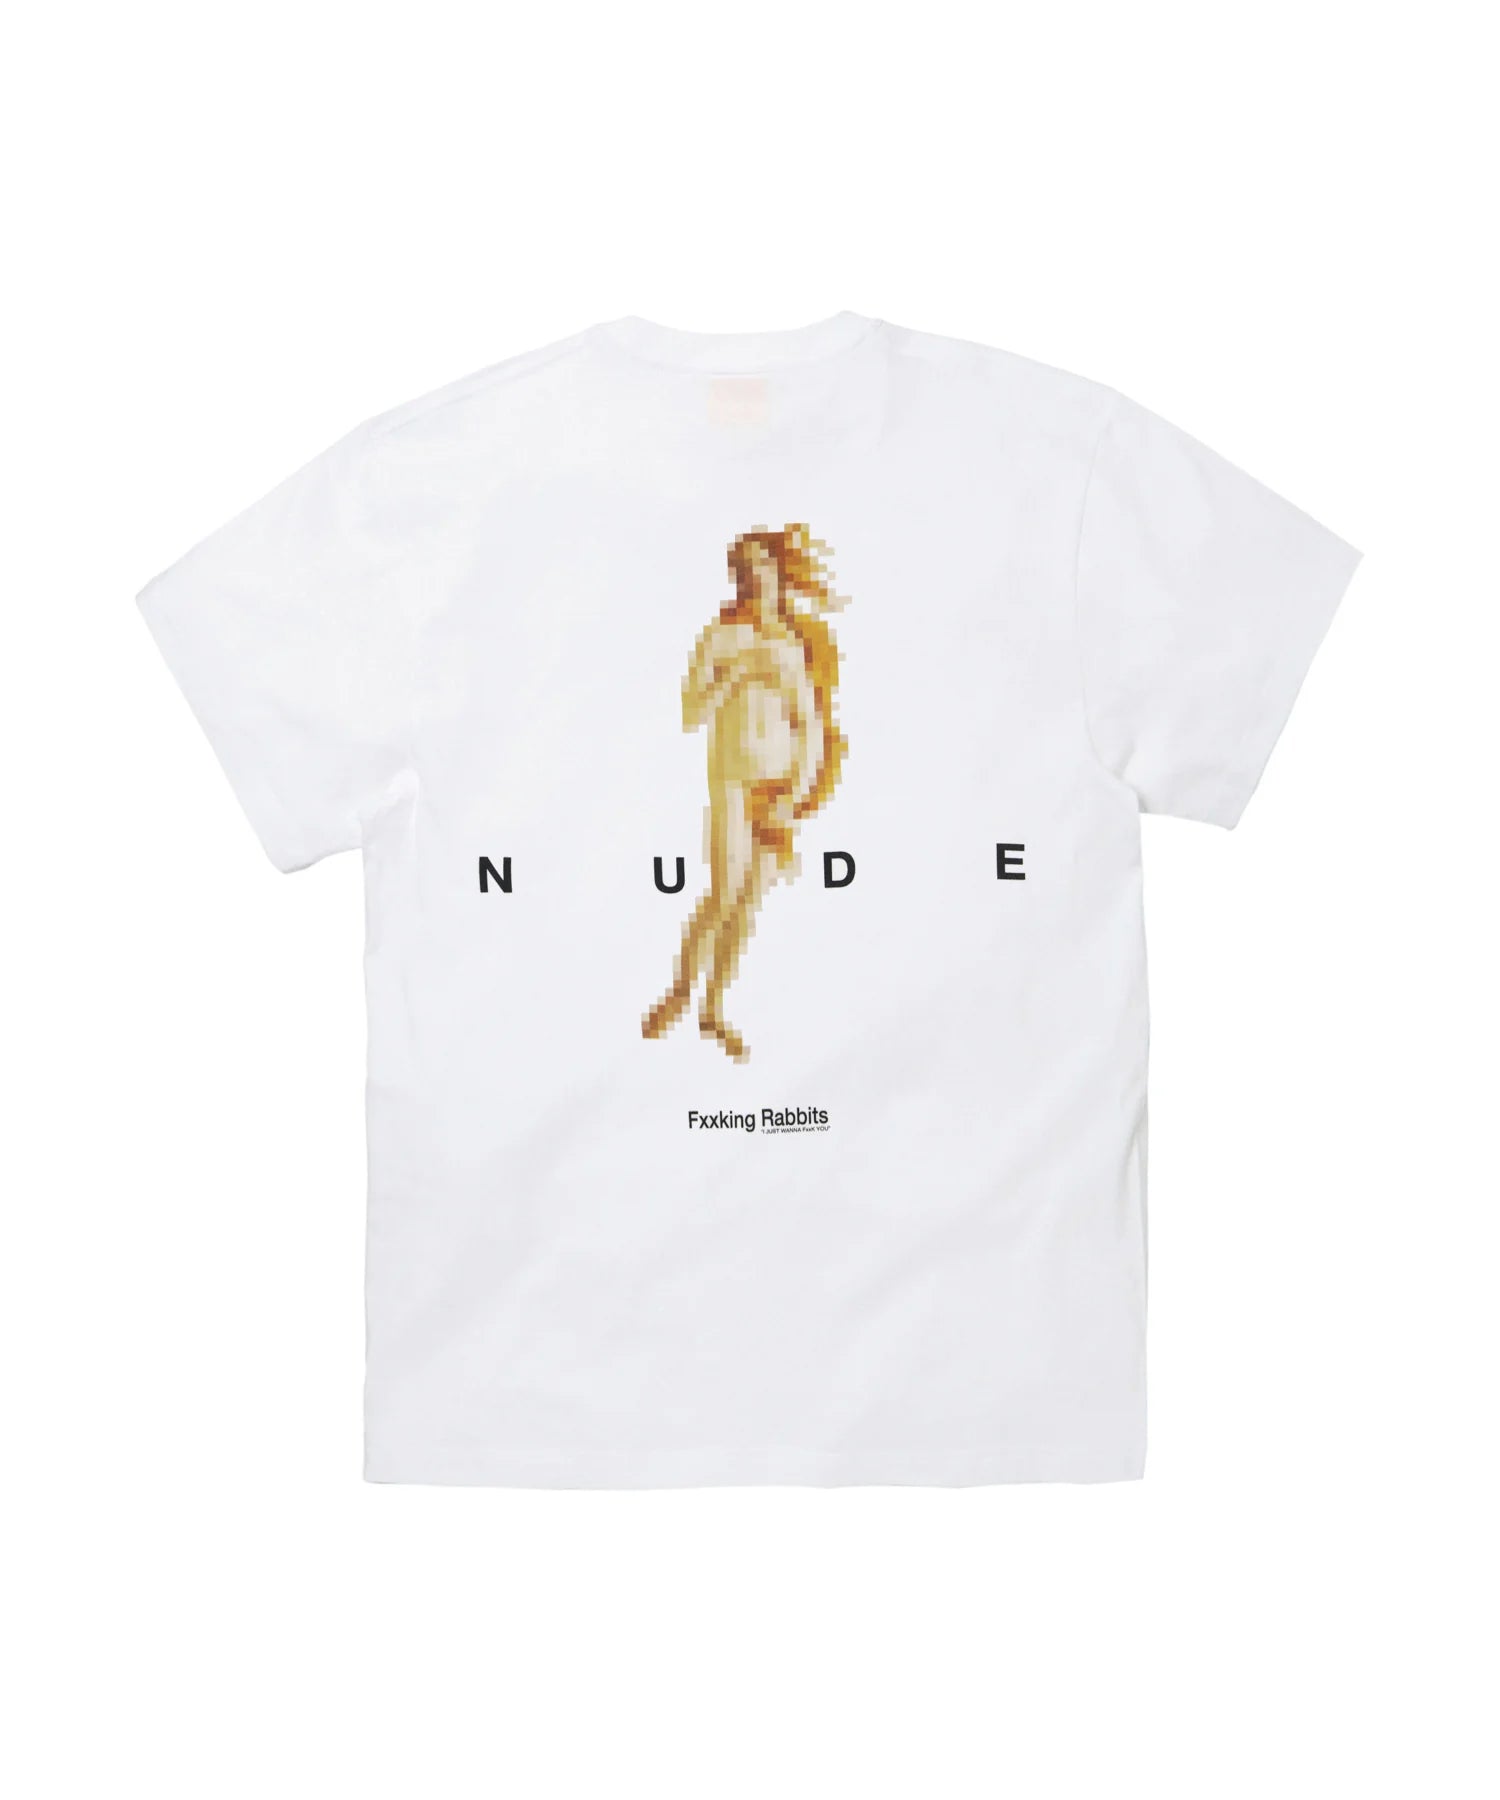 Pixelated Nude T-shirt frc2565